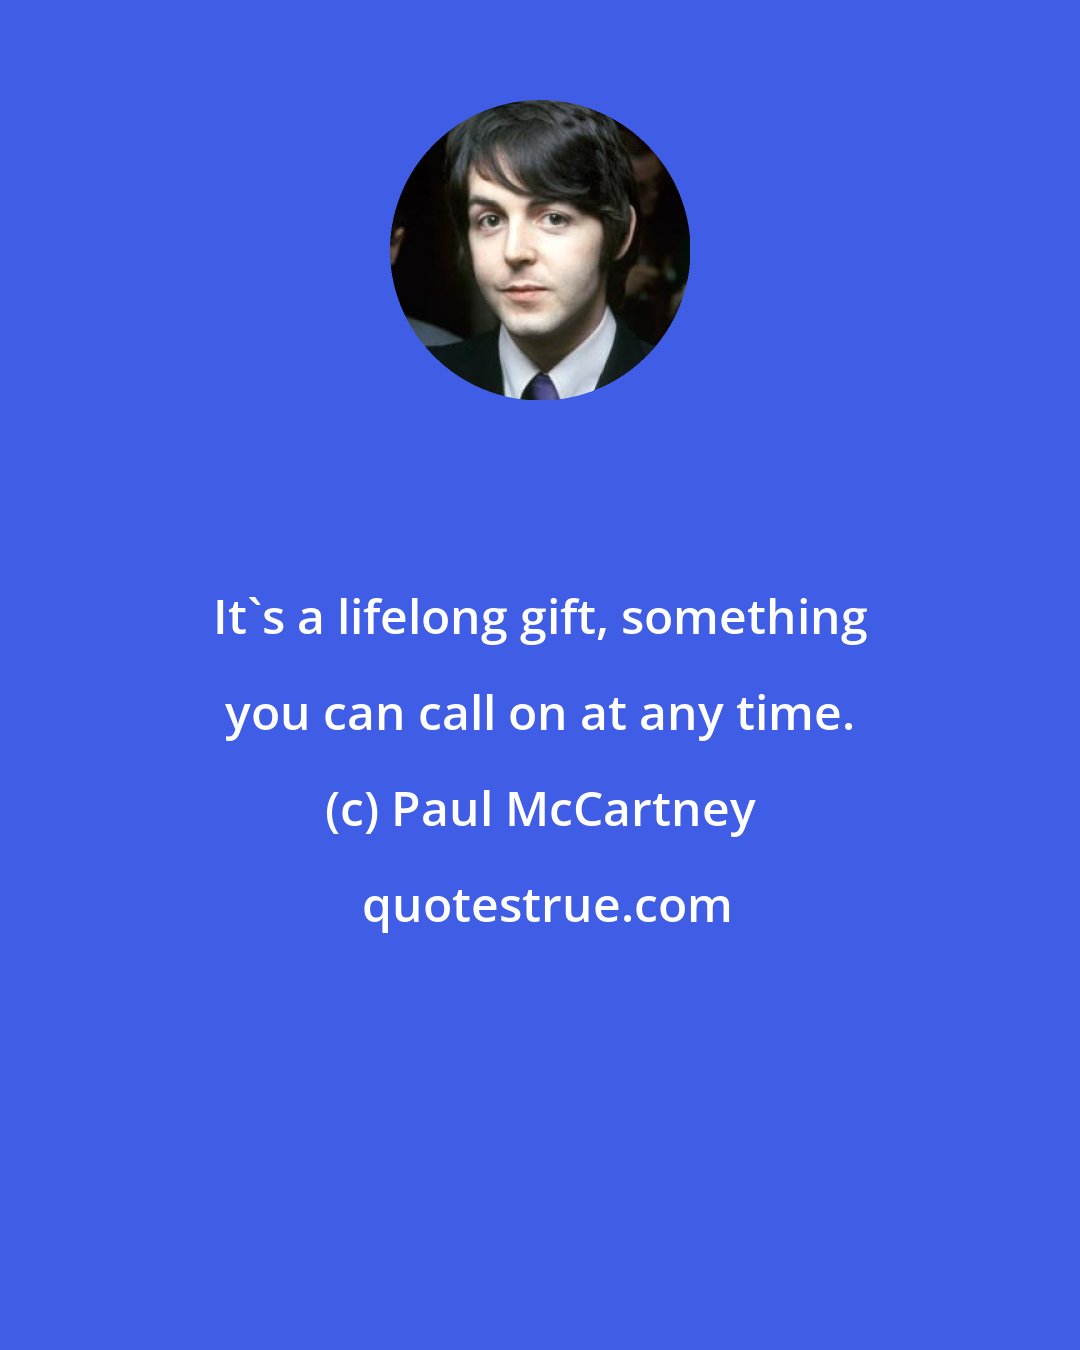 Paul McCartney: It's a lifelong gift, something you can call on at any time.